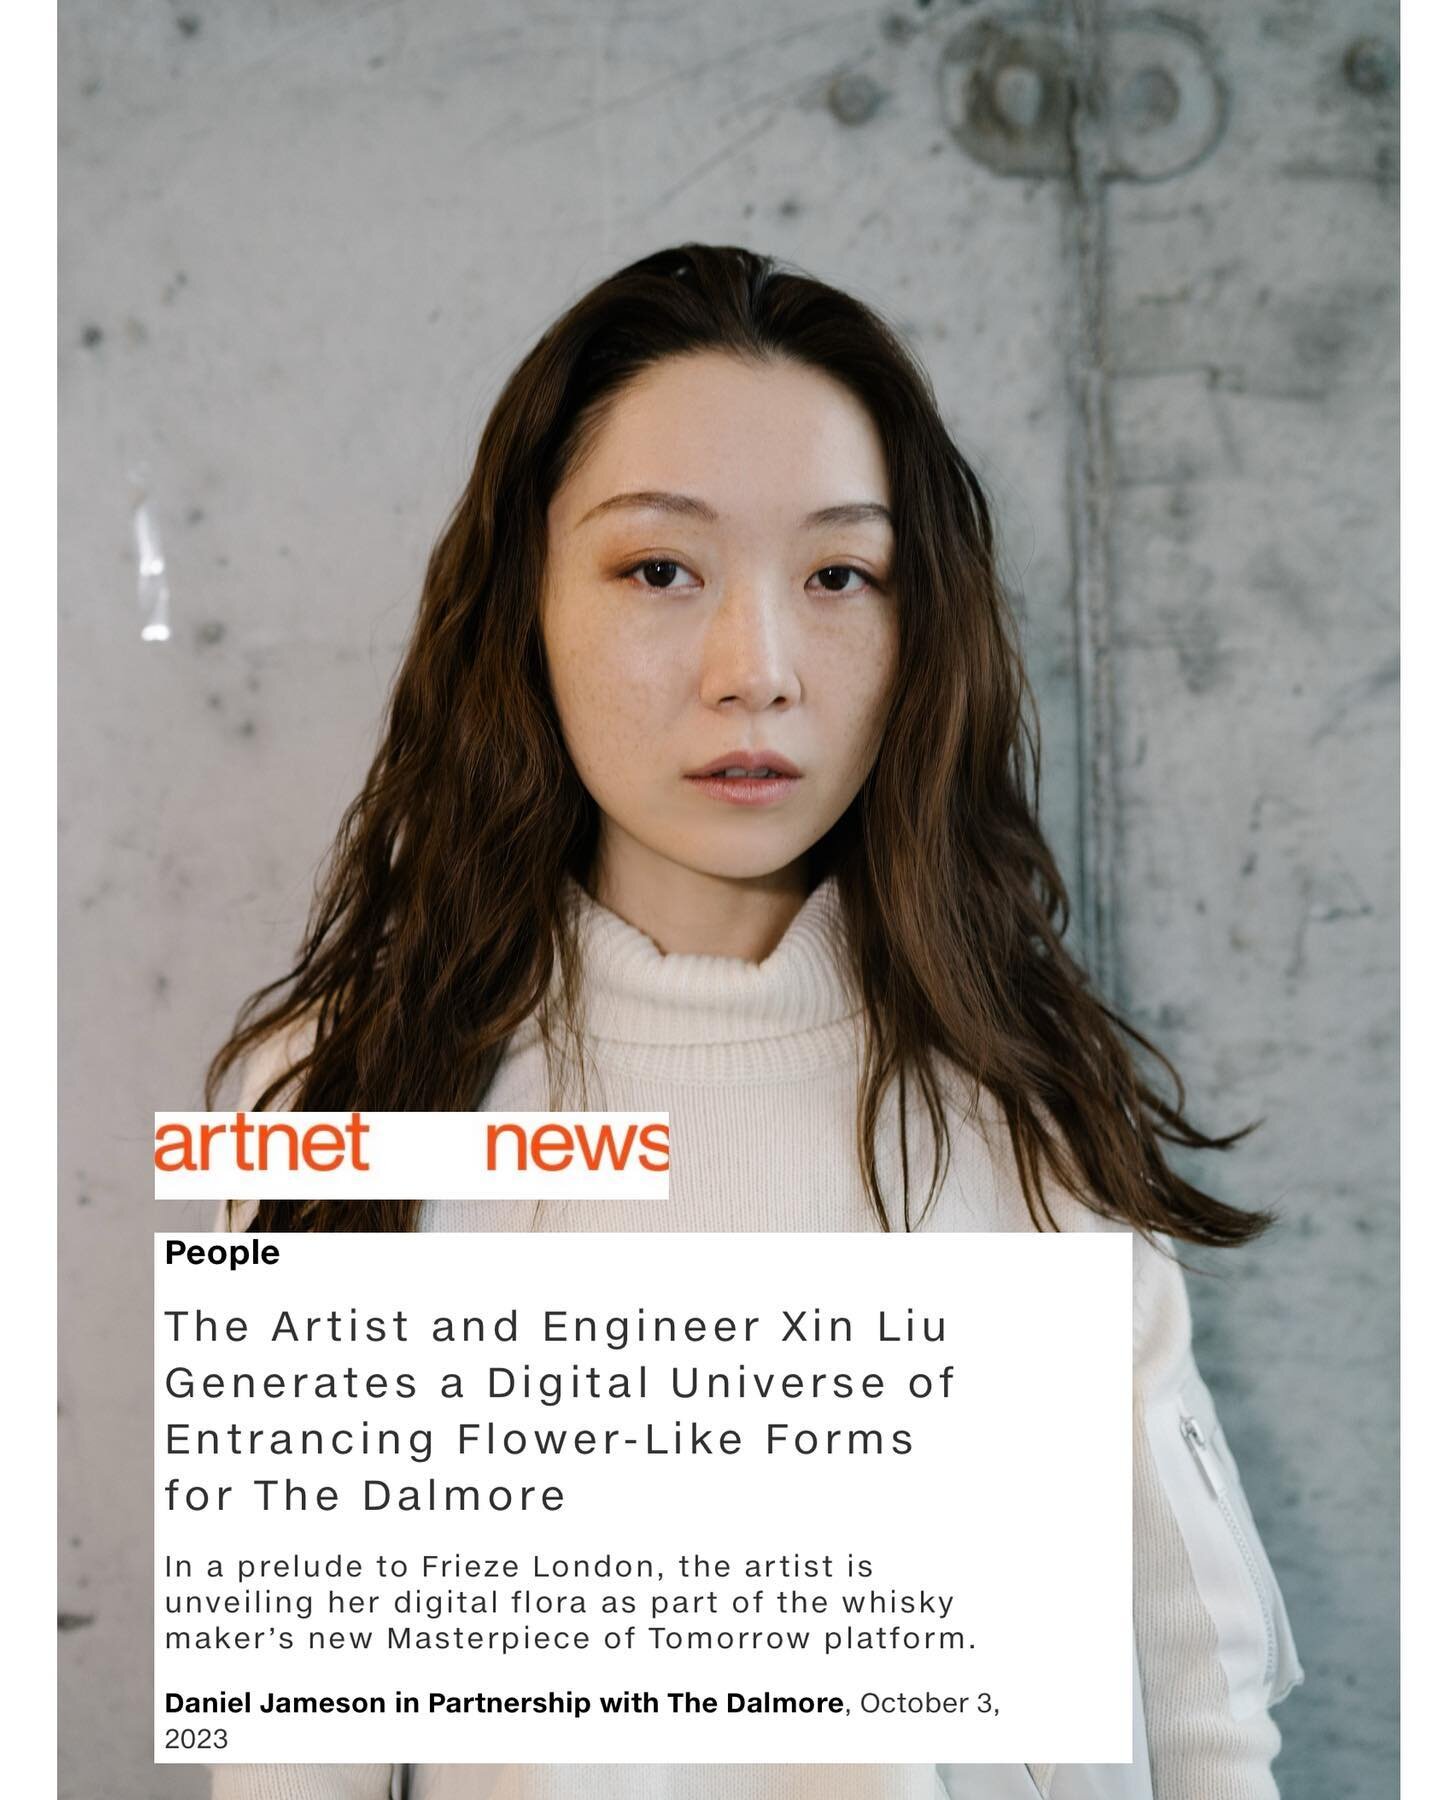 Thank you @artnet and Brian for a good morning chat time.🪻

Im proud for this piece, a smooth  and truly inspiring journey where nan and my artistic expressions are well represented and naturally connected with the craft/art in @thedalmore &lsquo;s 